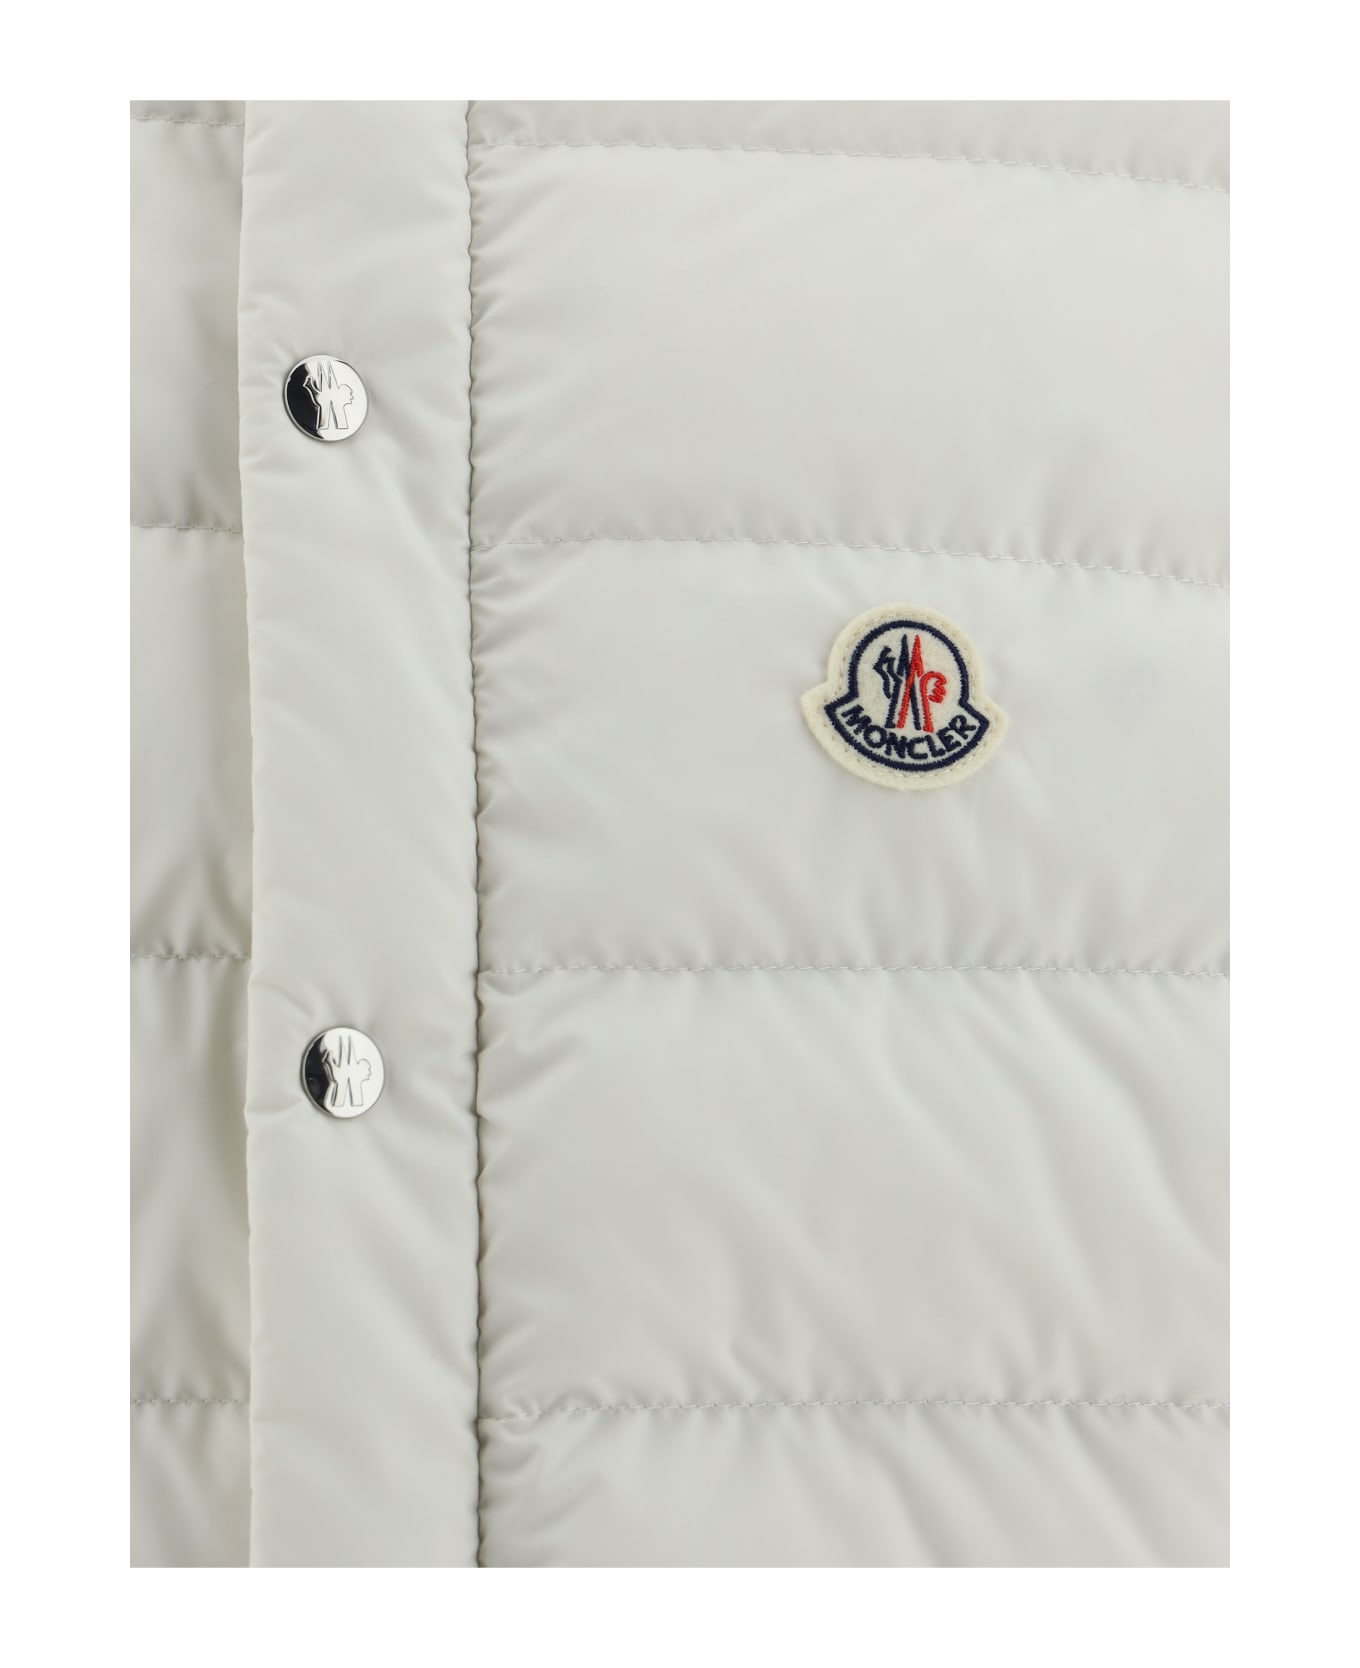 Moncler Colomb Down Jacket - 034